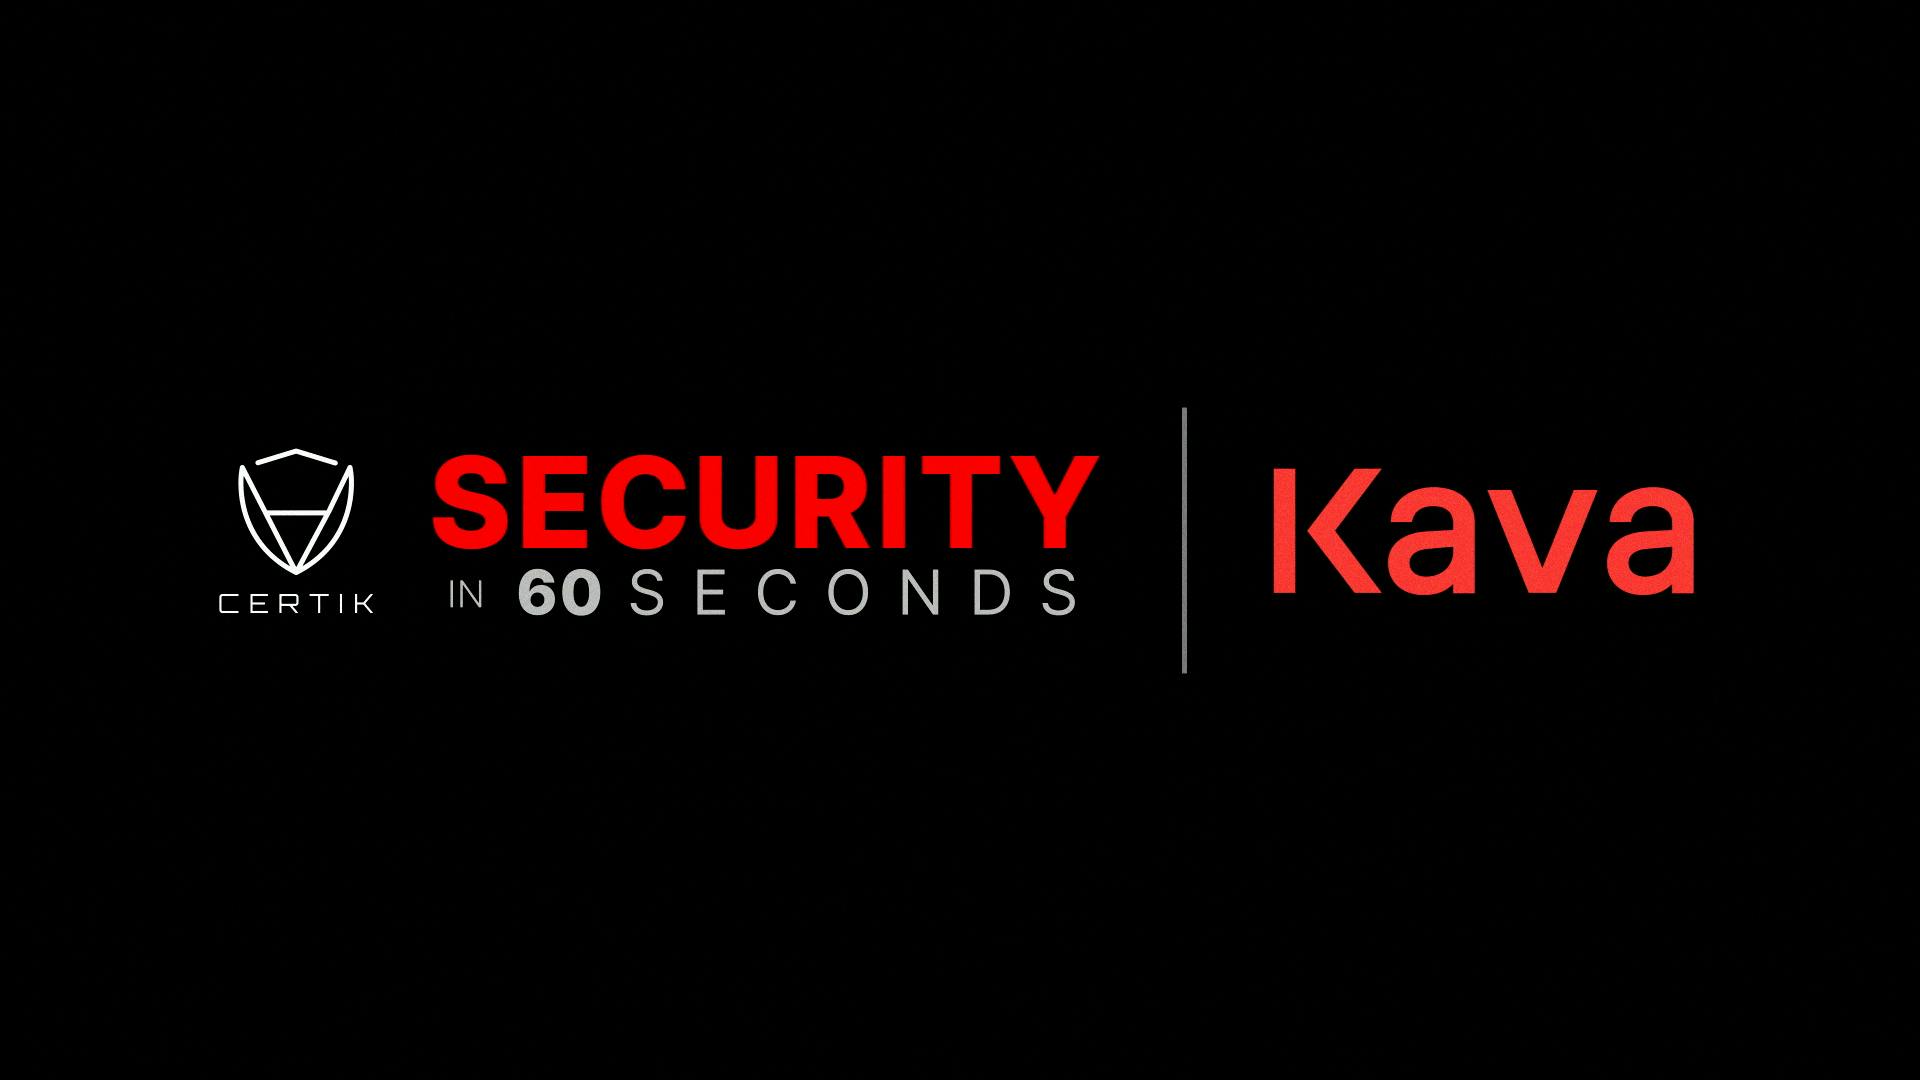 Security in 60 Seconds - Kava